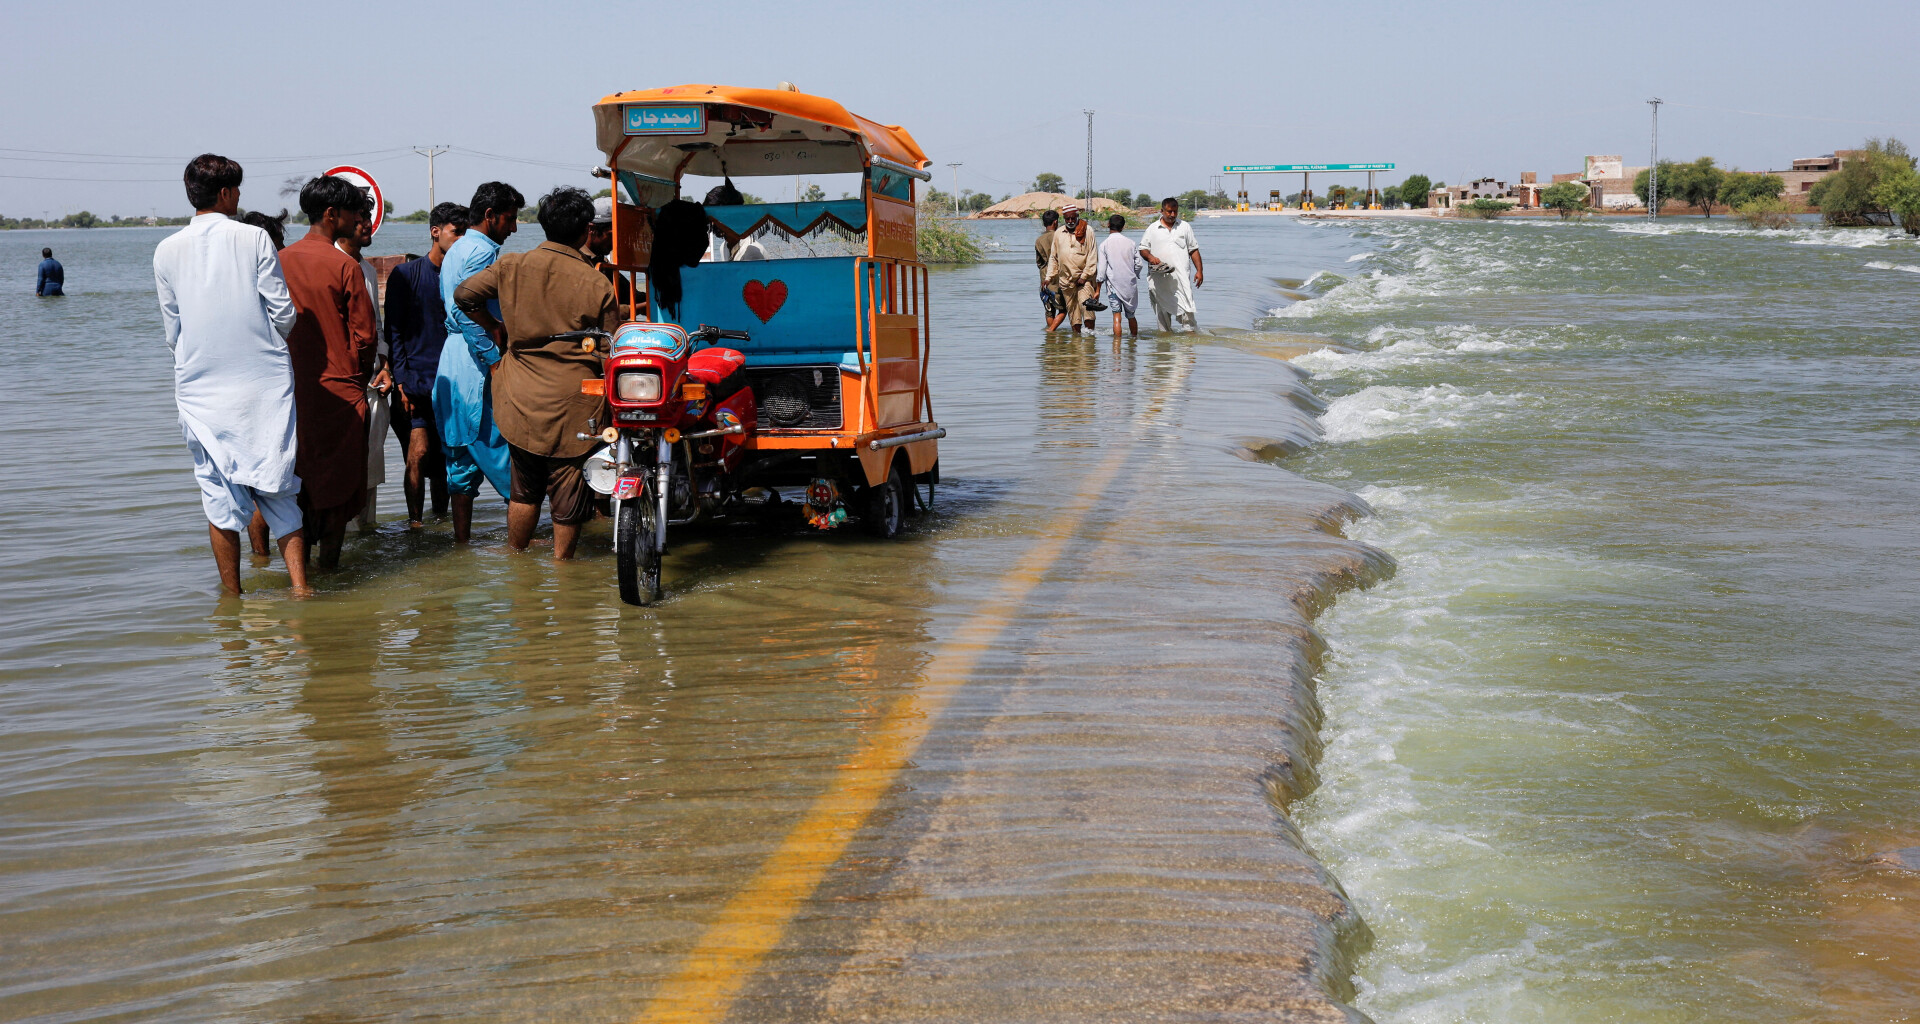 4 ways to shore up South Asian coastal communities against climate change